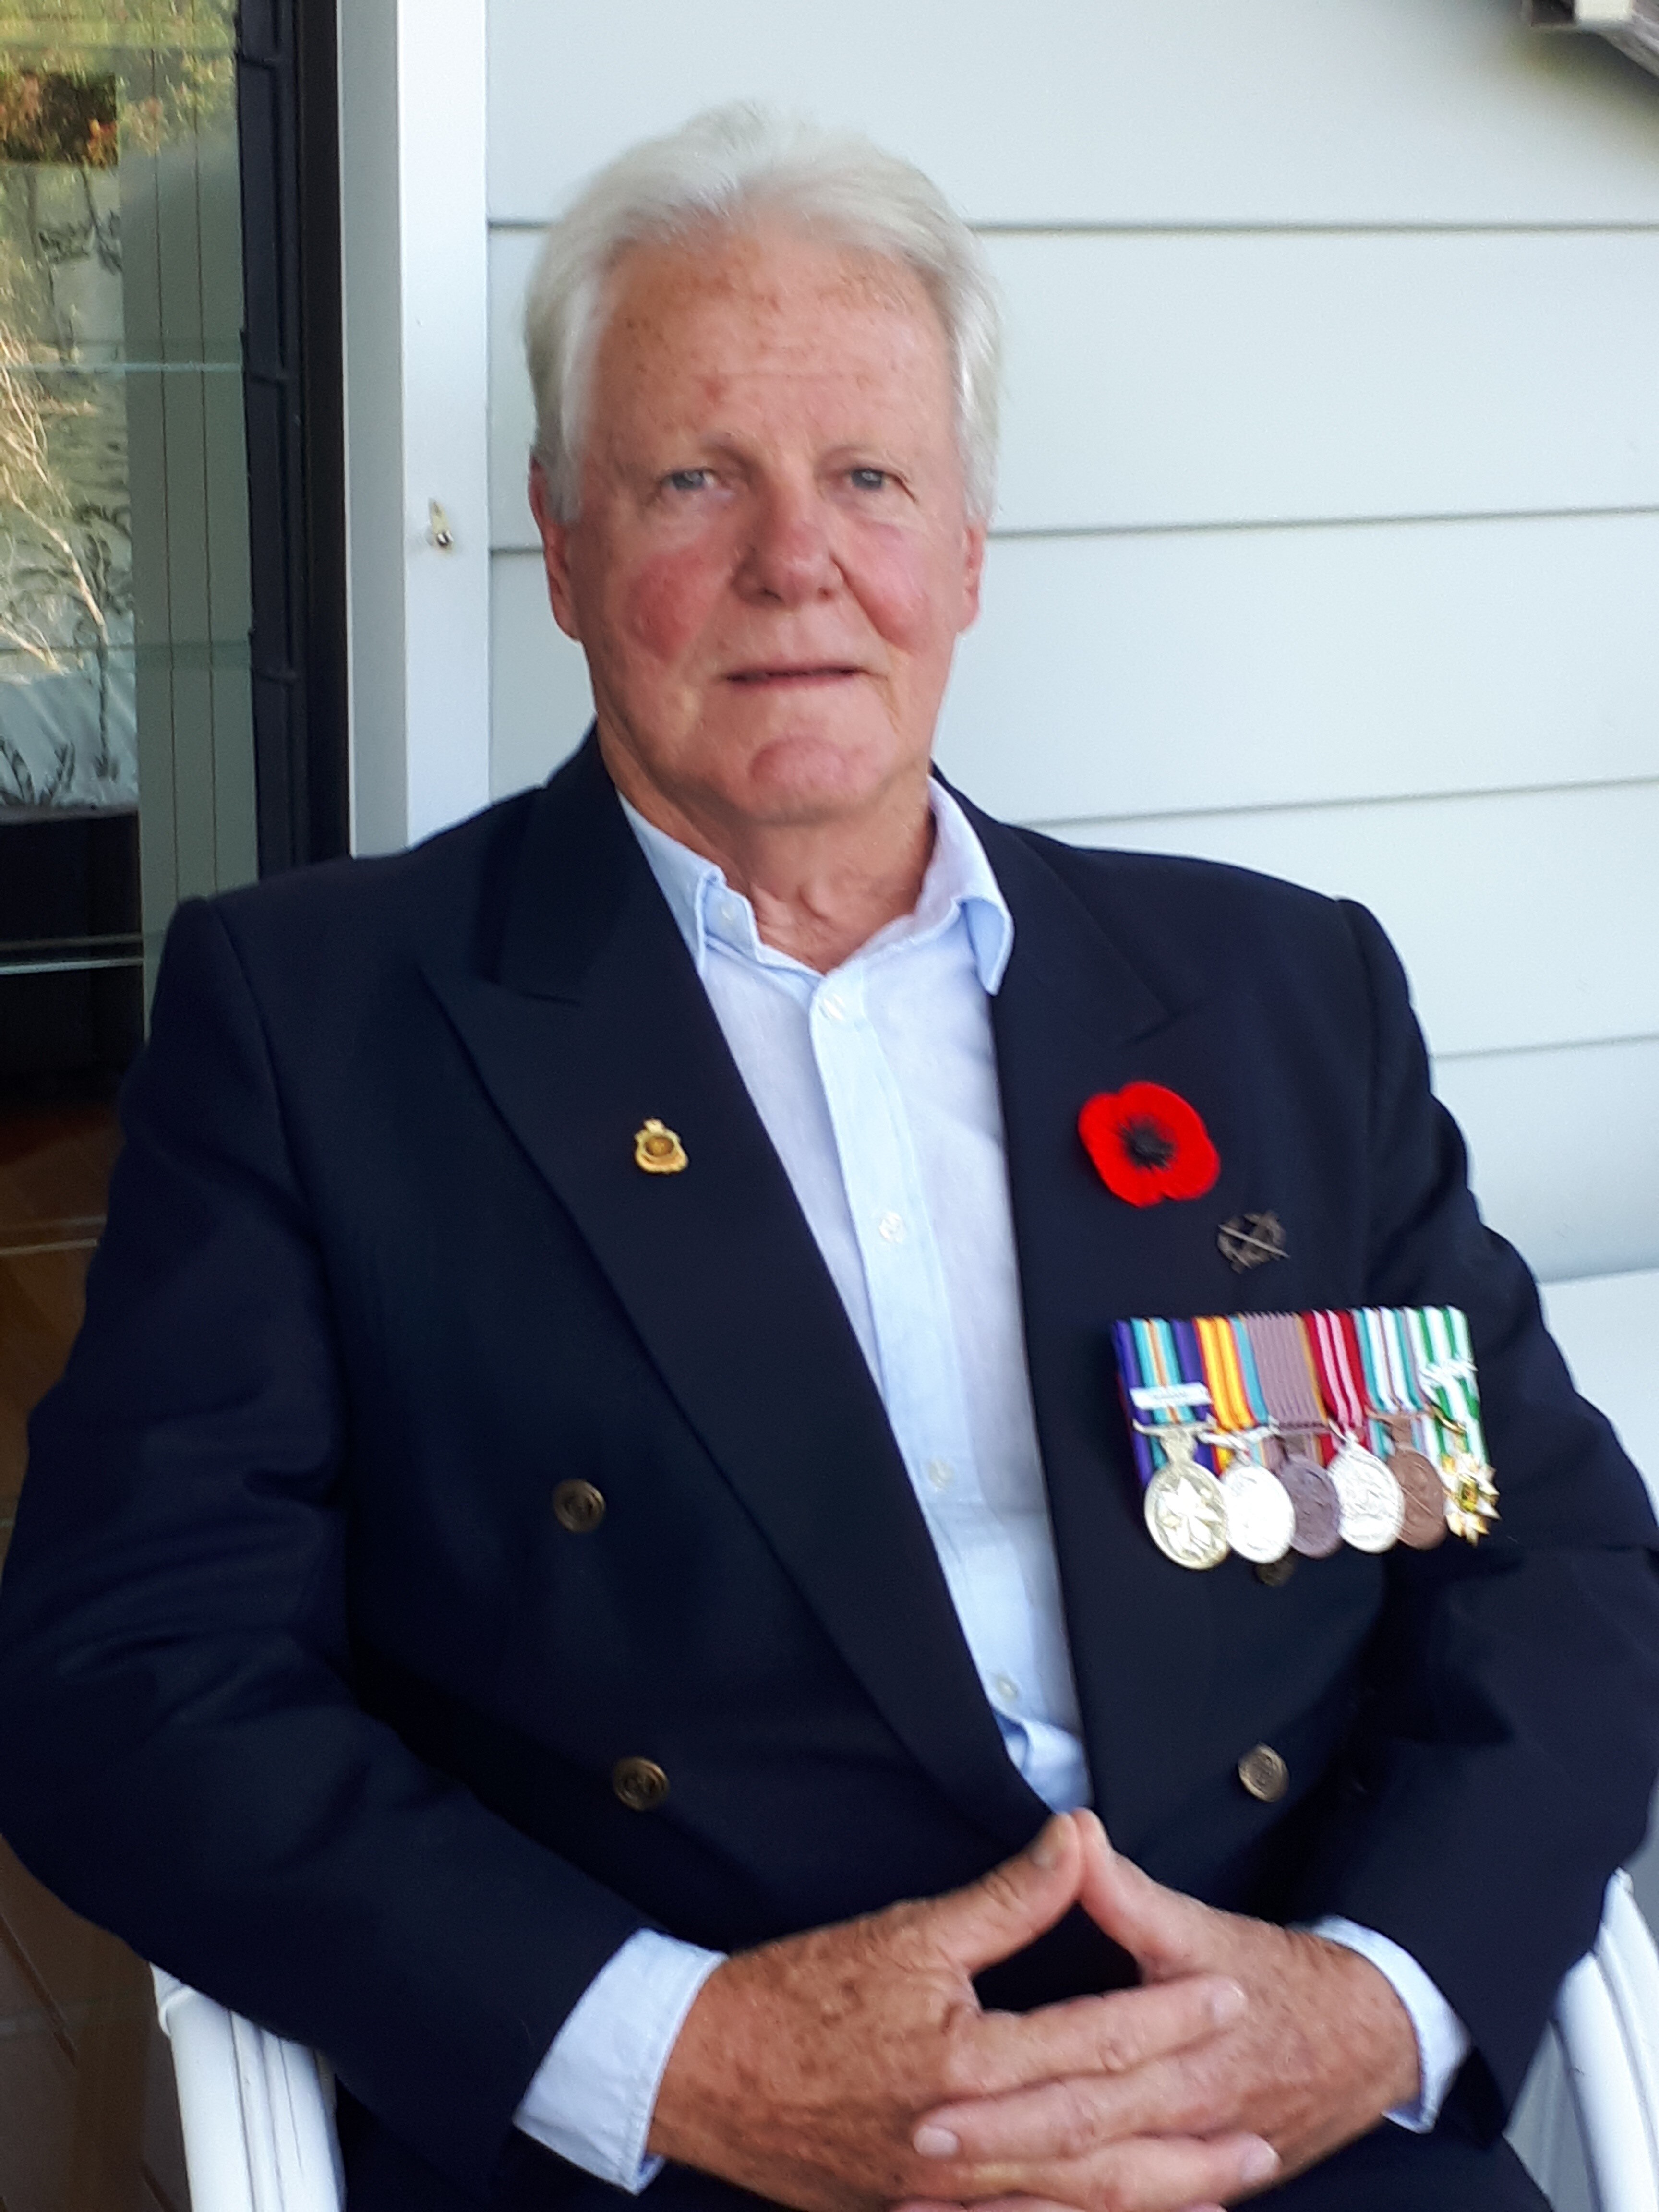 A man sitting in a chair wearing a navy blazer with a poppy and war medals pinned on his chest.